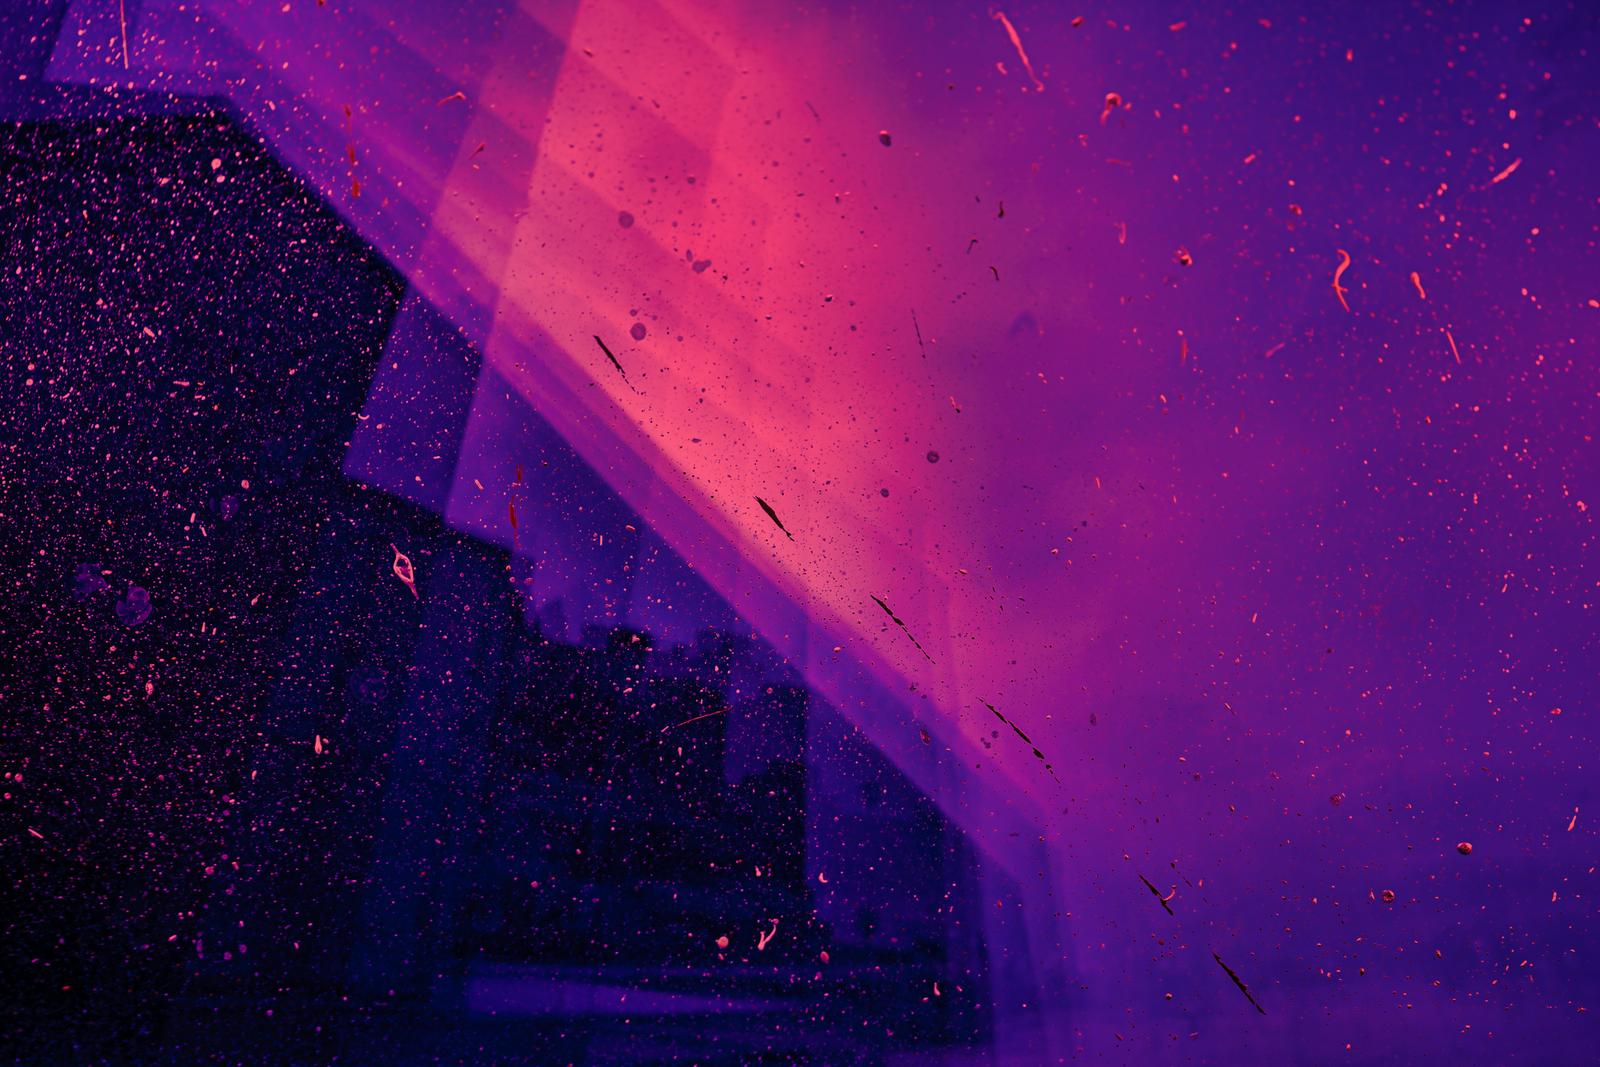 Abstract pink and purple image